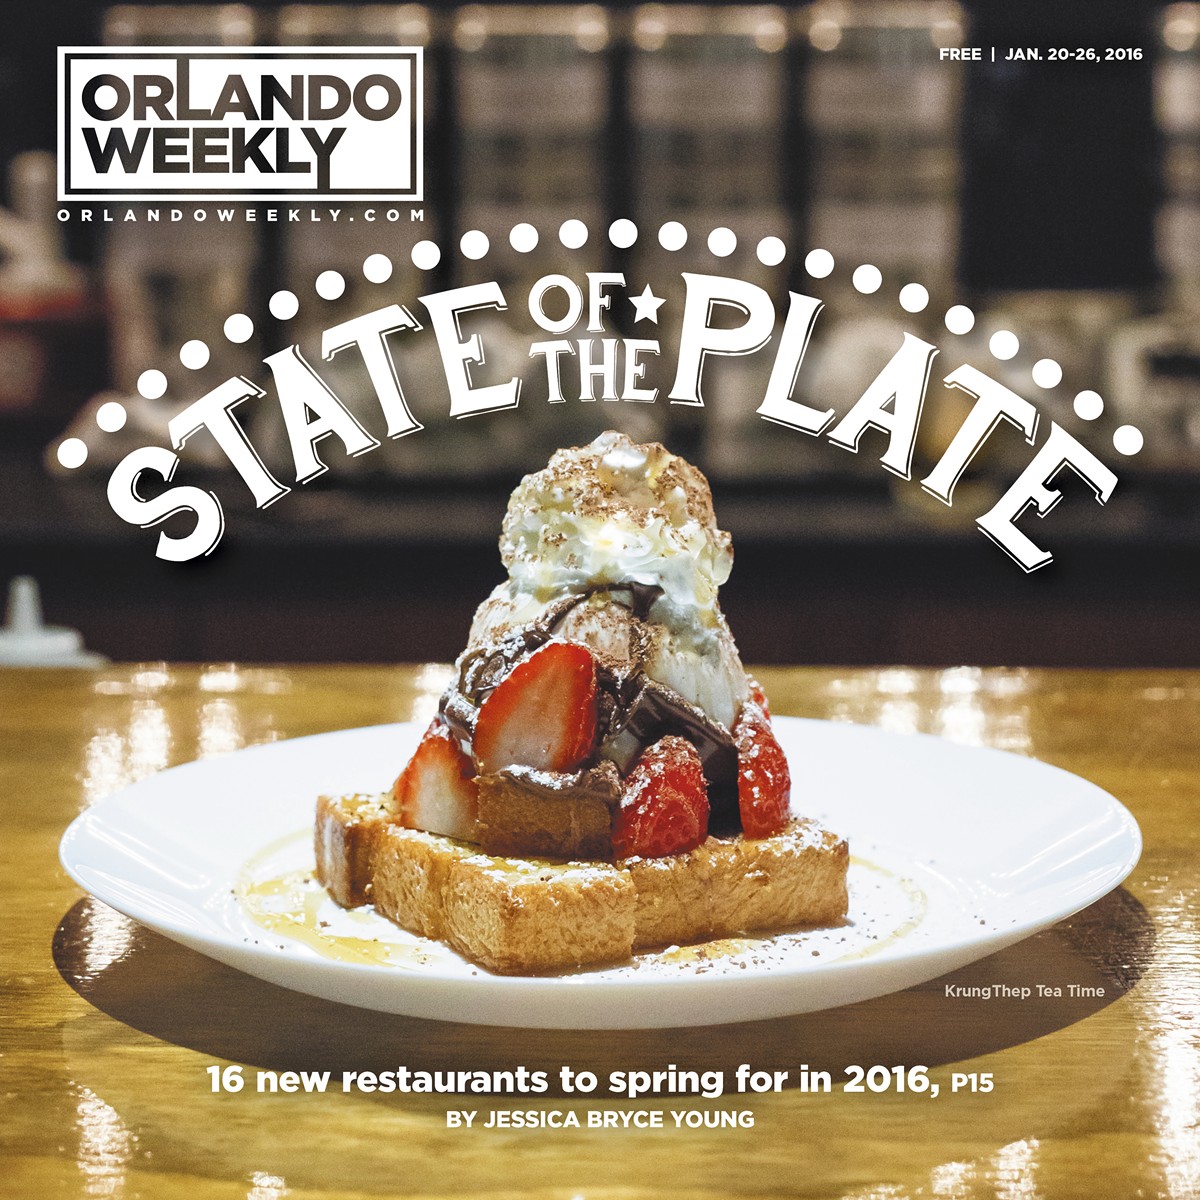 16 new Orlando restaurants you need to try in 2016